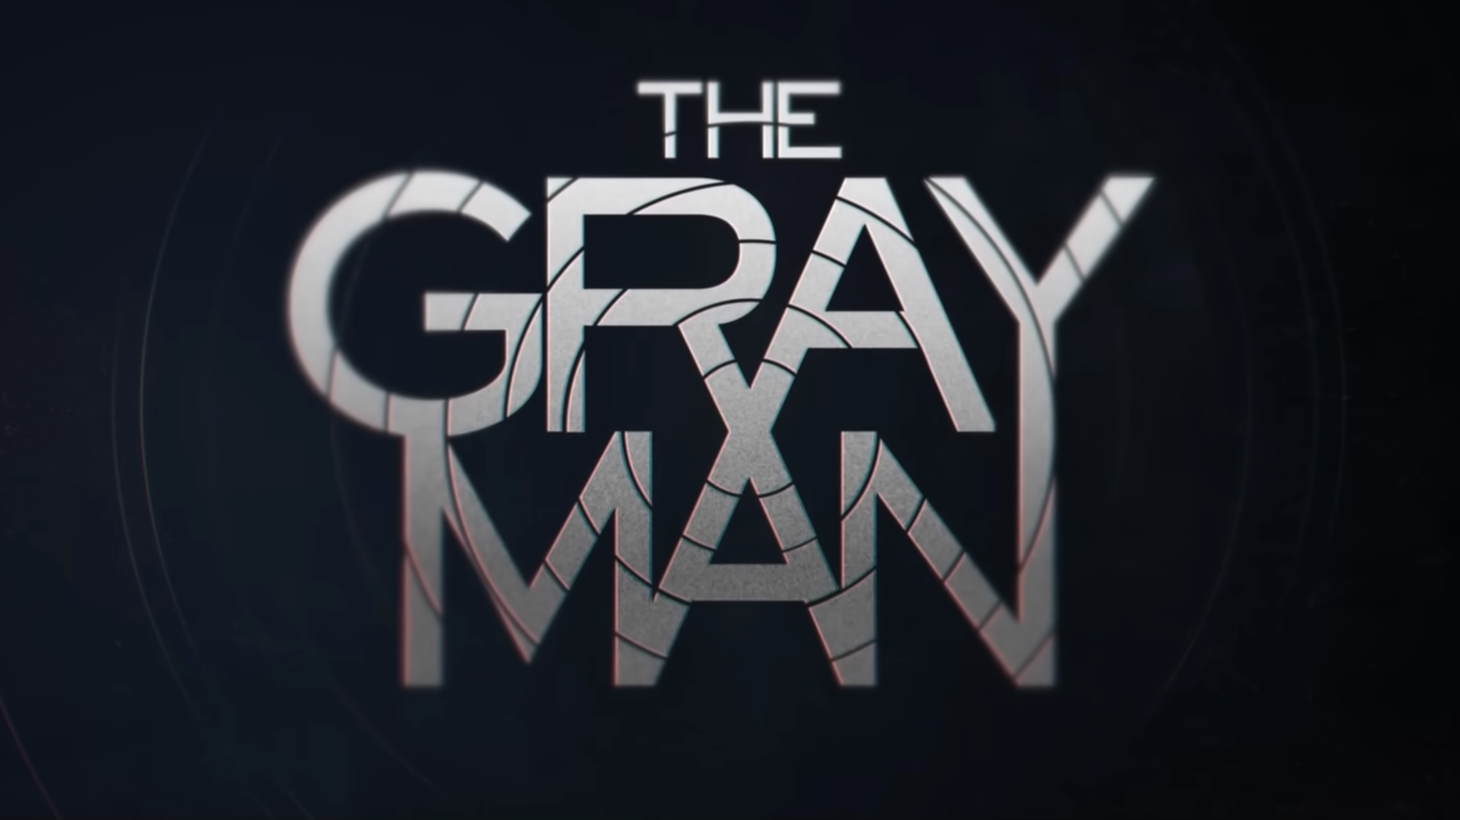 “The Gray Man” is about the CIA’s most skilled operative who becomes the target in a global manhunt.